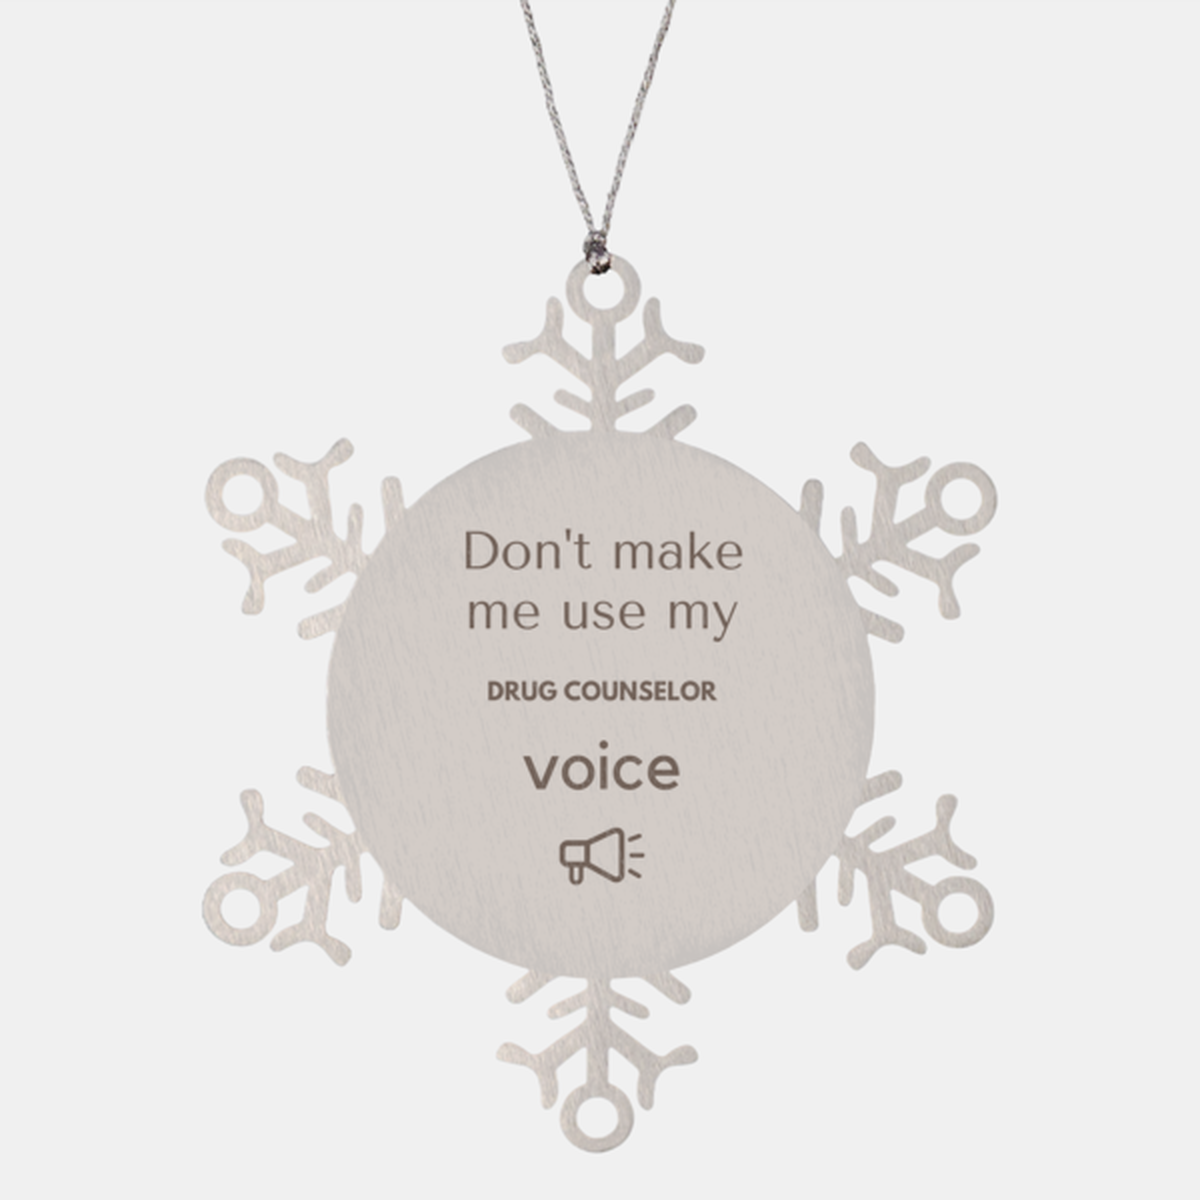 Don't make me use my Drug Counselor voice, Sarcasm Drug Counselor Ornament Gifts, Christmas Drug Counselor Snowflake Ornament Unique Gifts For Drug Counselor Coworkers, Men, Women, Colleague, Friends